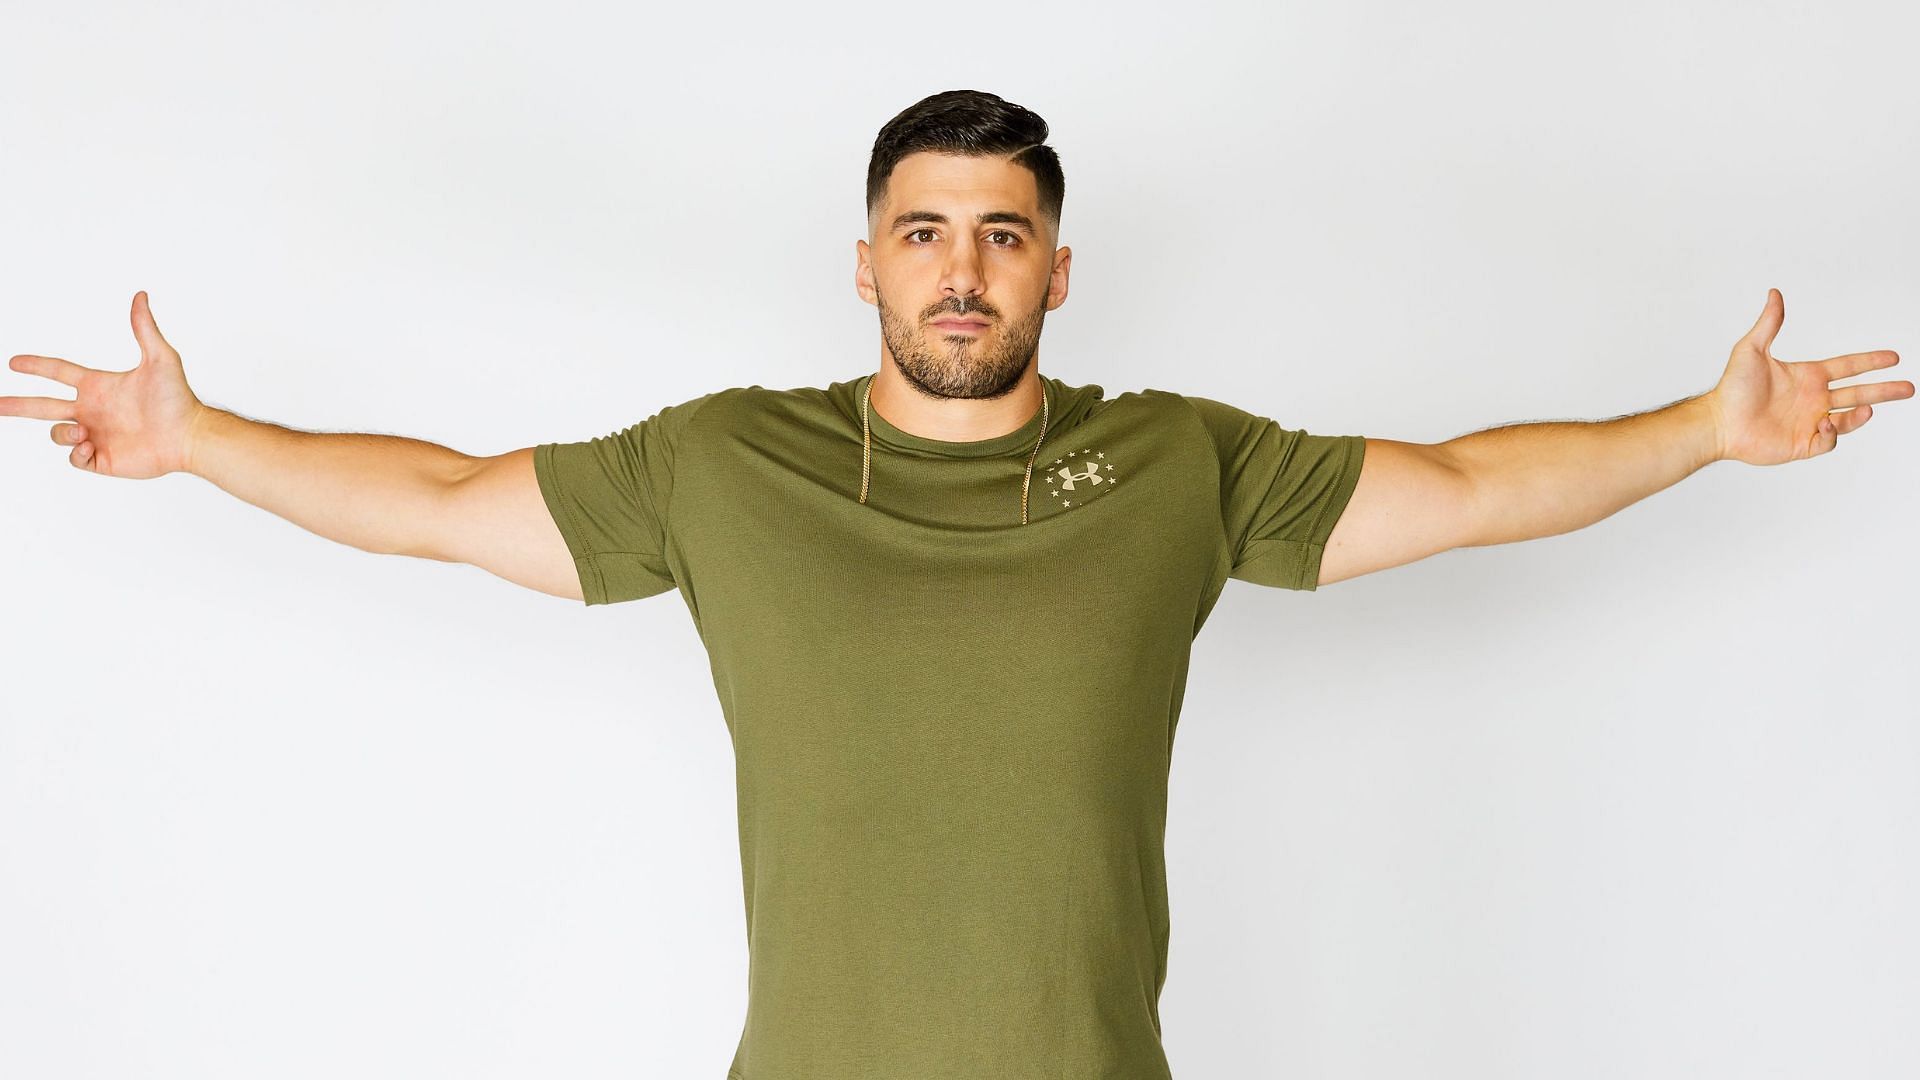 NICKMERCS reveals his wholesome plans for Thanksgiving this year (Image via Under Armour)